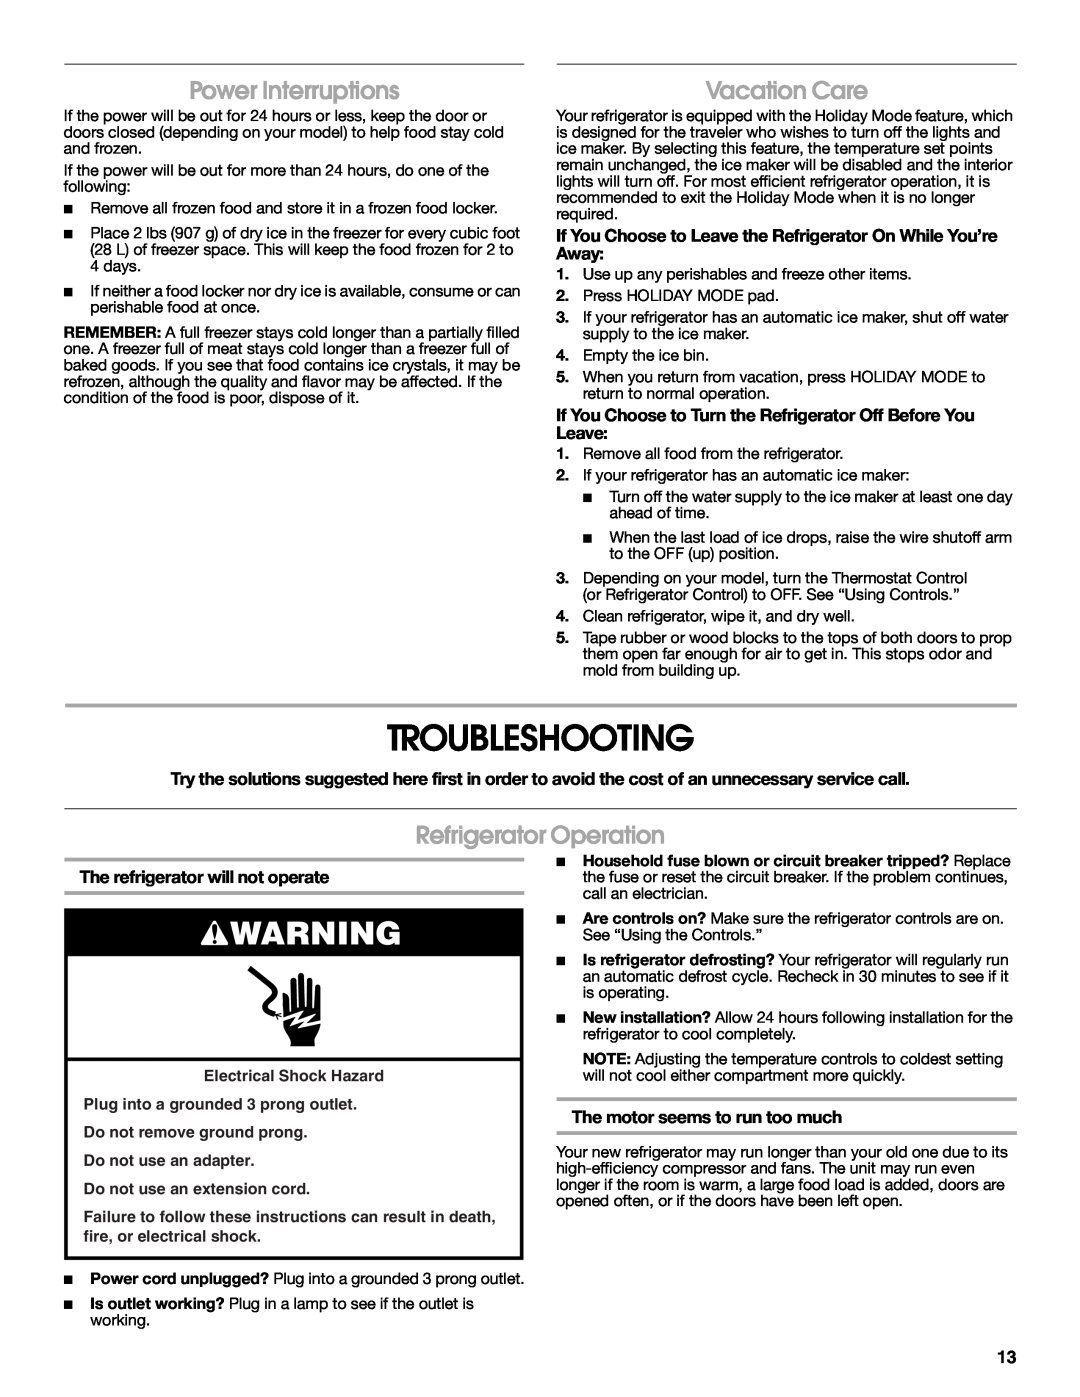 Jenn-Air W10303988A manual Troubleshooting, Power Interruptions, Vacation Care, Refrigerator Operation, Leave 